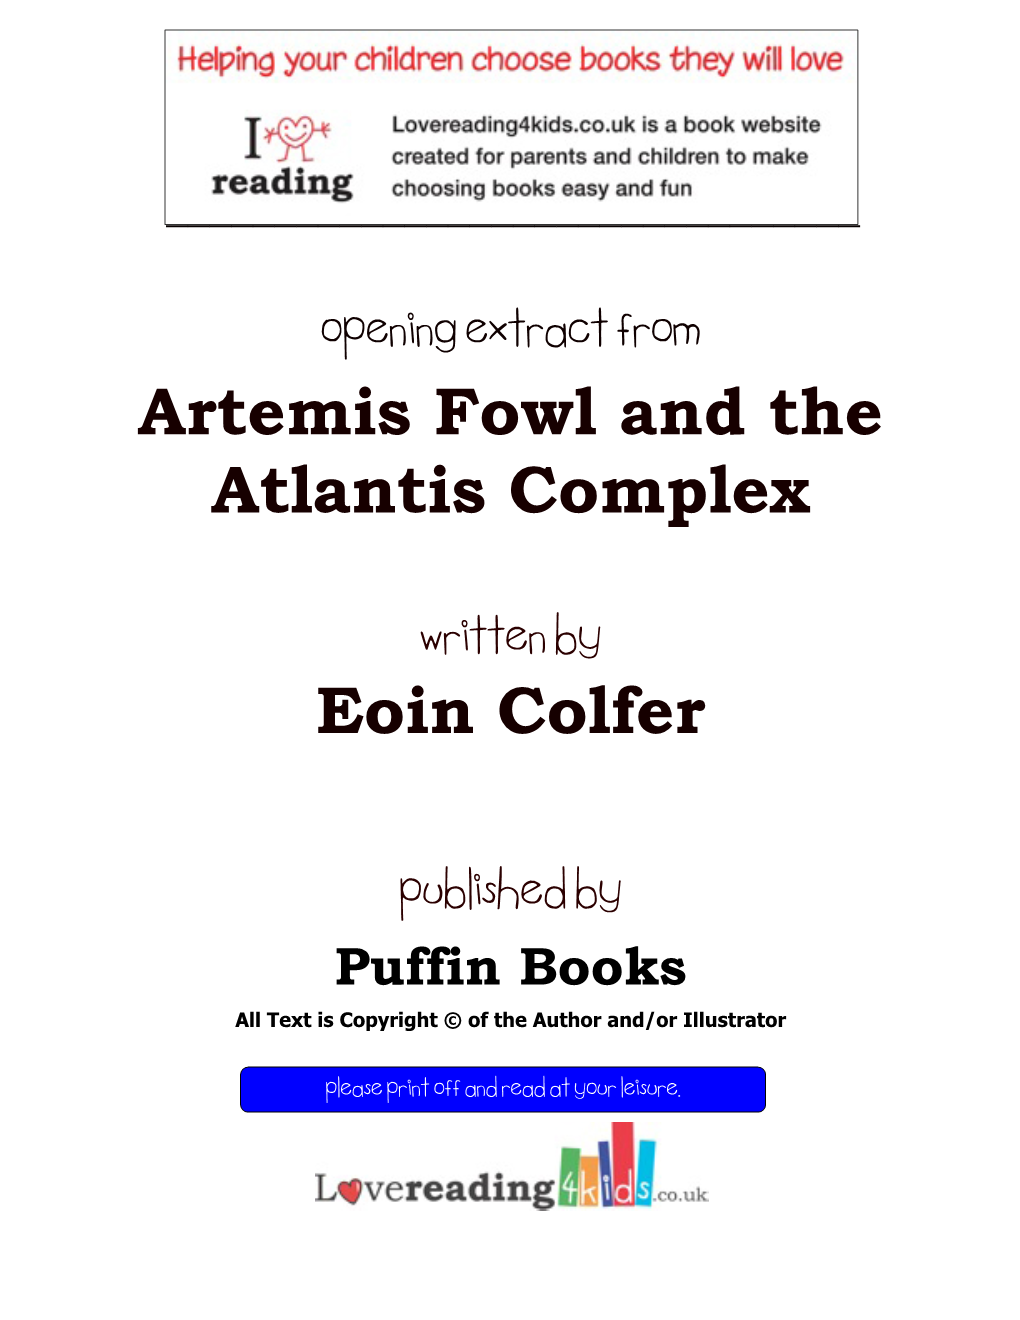 Artemis Fowl and the Atlantis Complex Eoin Colfer